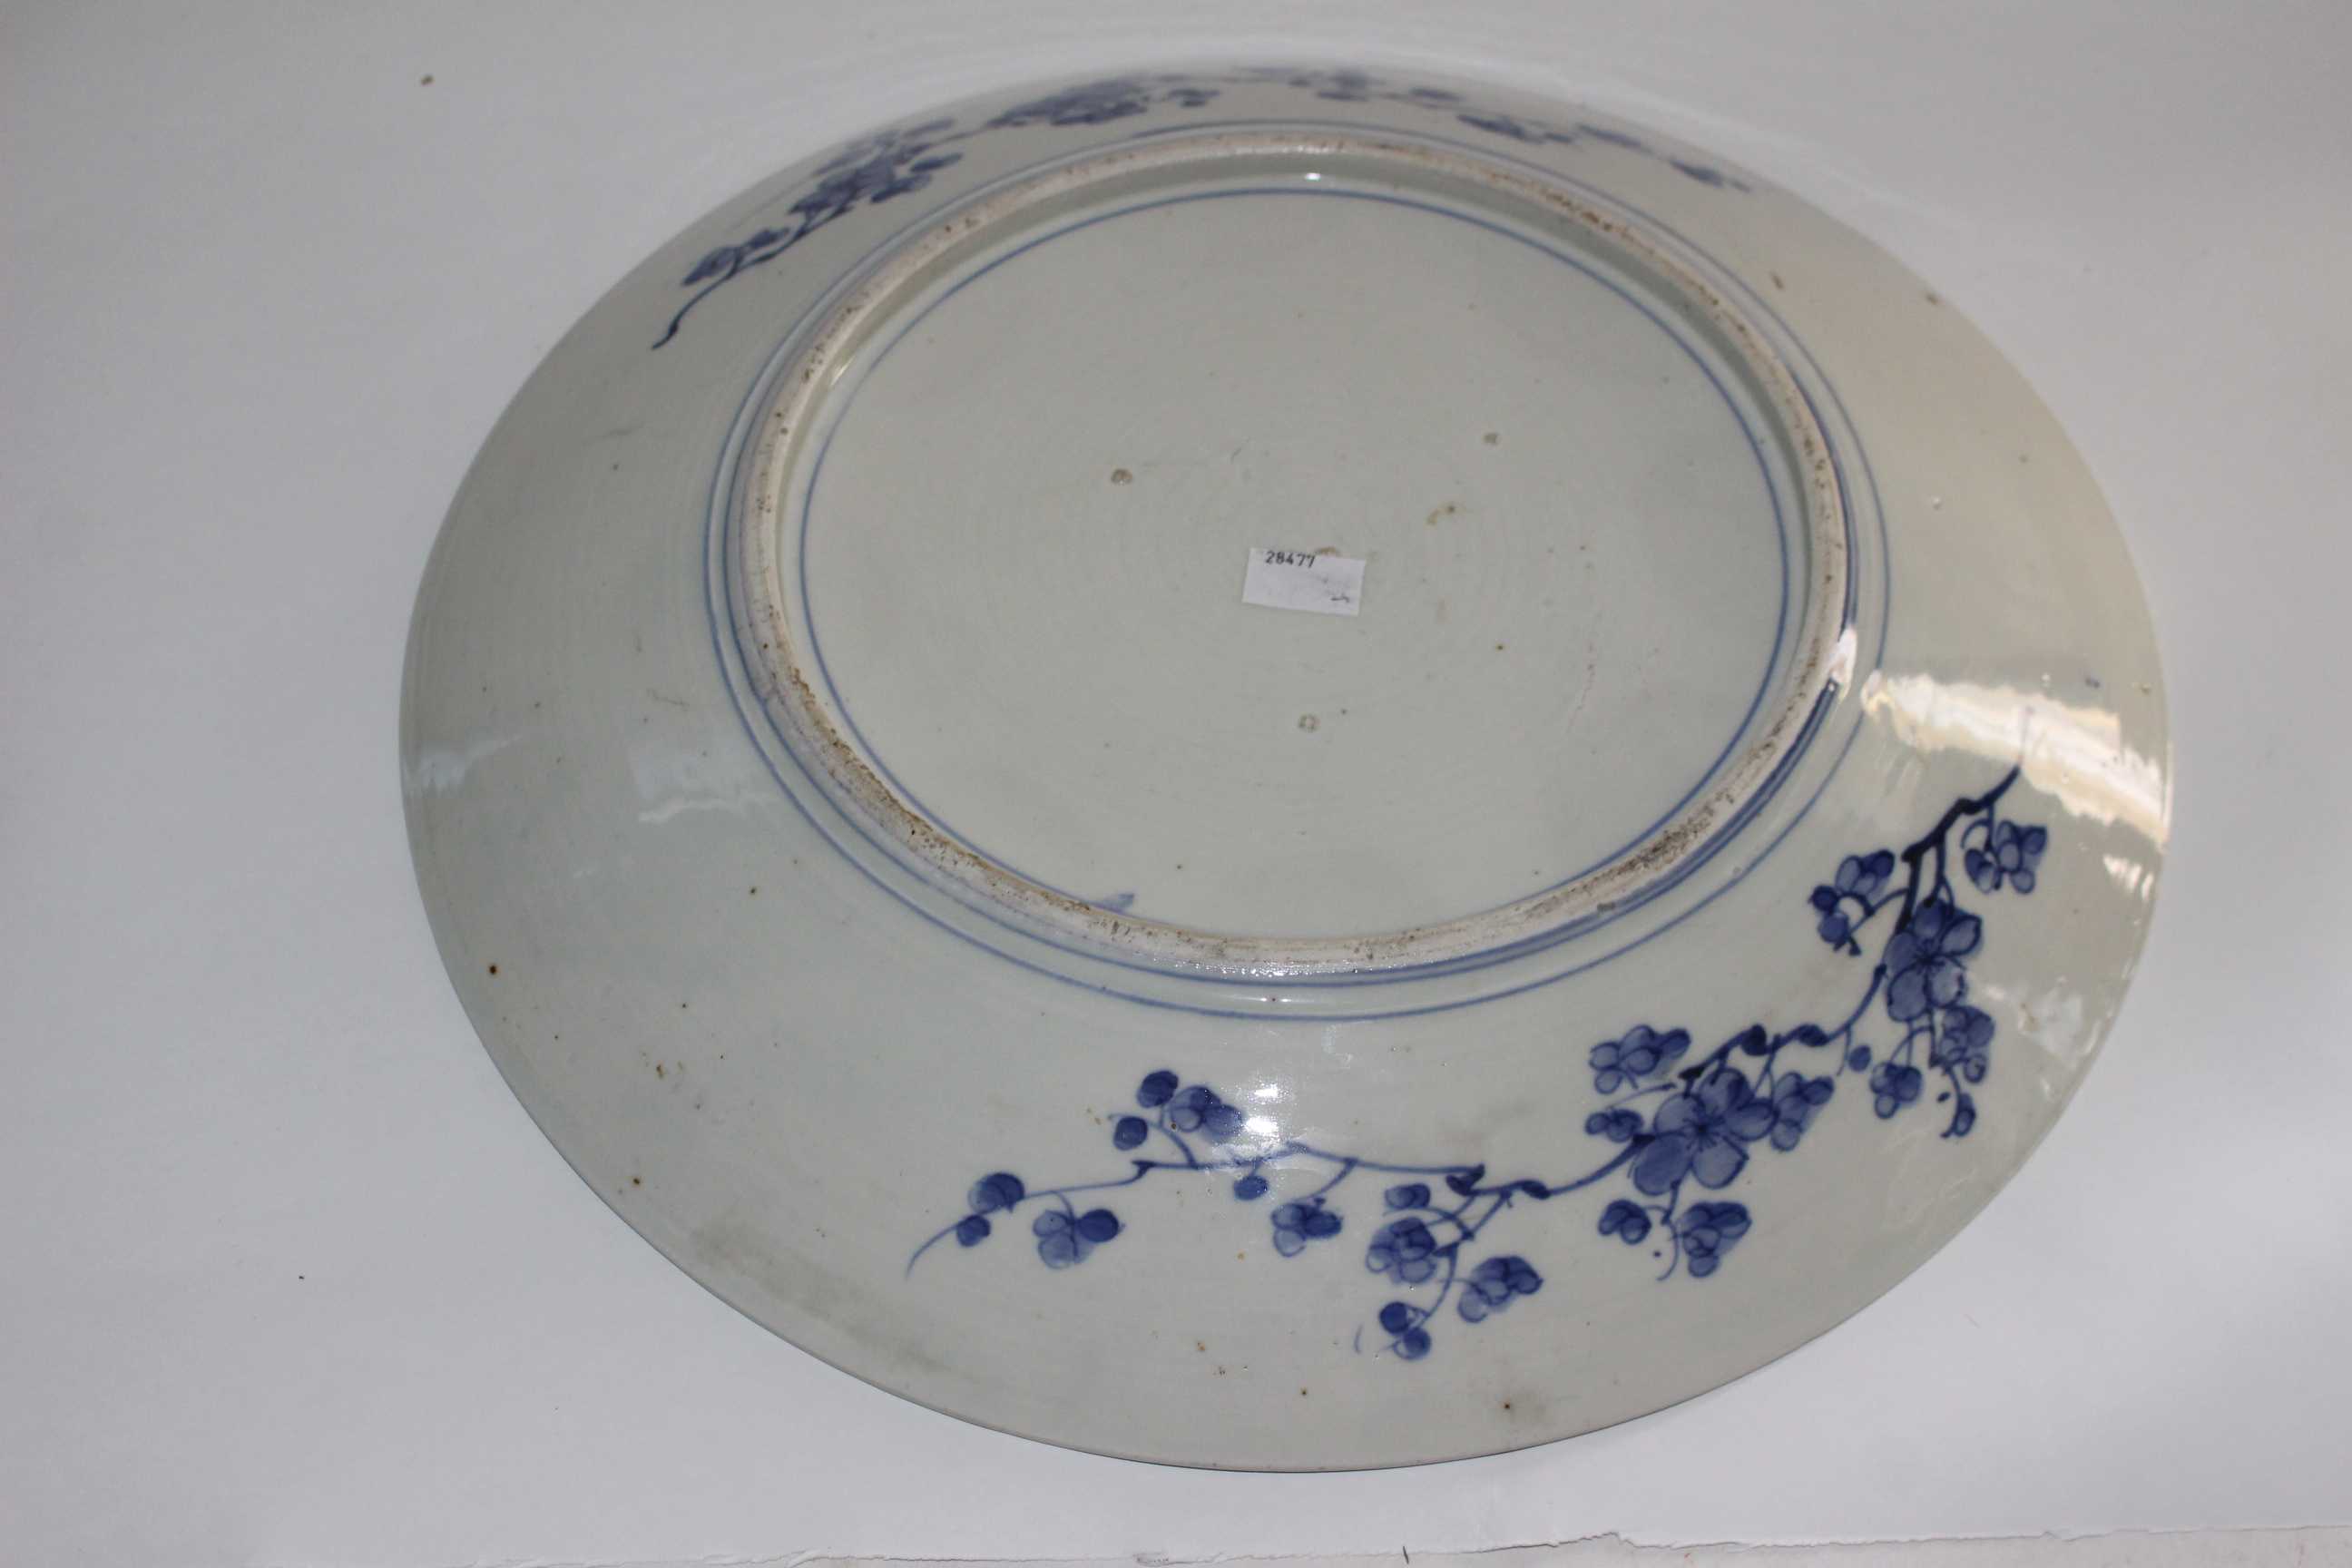 A Large Meiji Period Japanese Blue and white hand painted Imari Porcelain Wall Charger. - Image 3 of 3